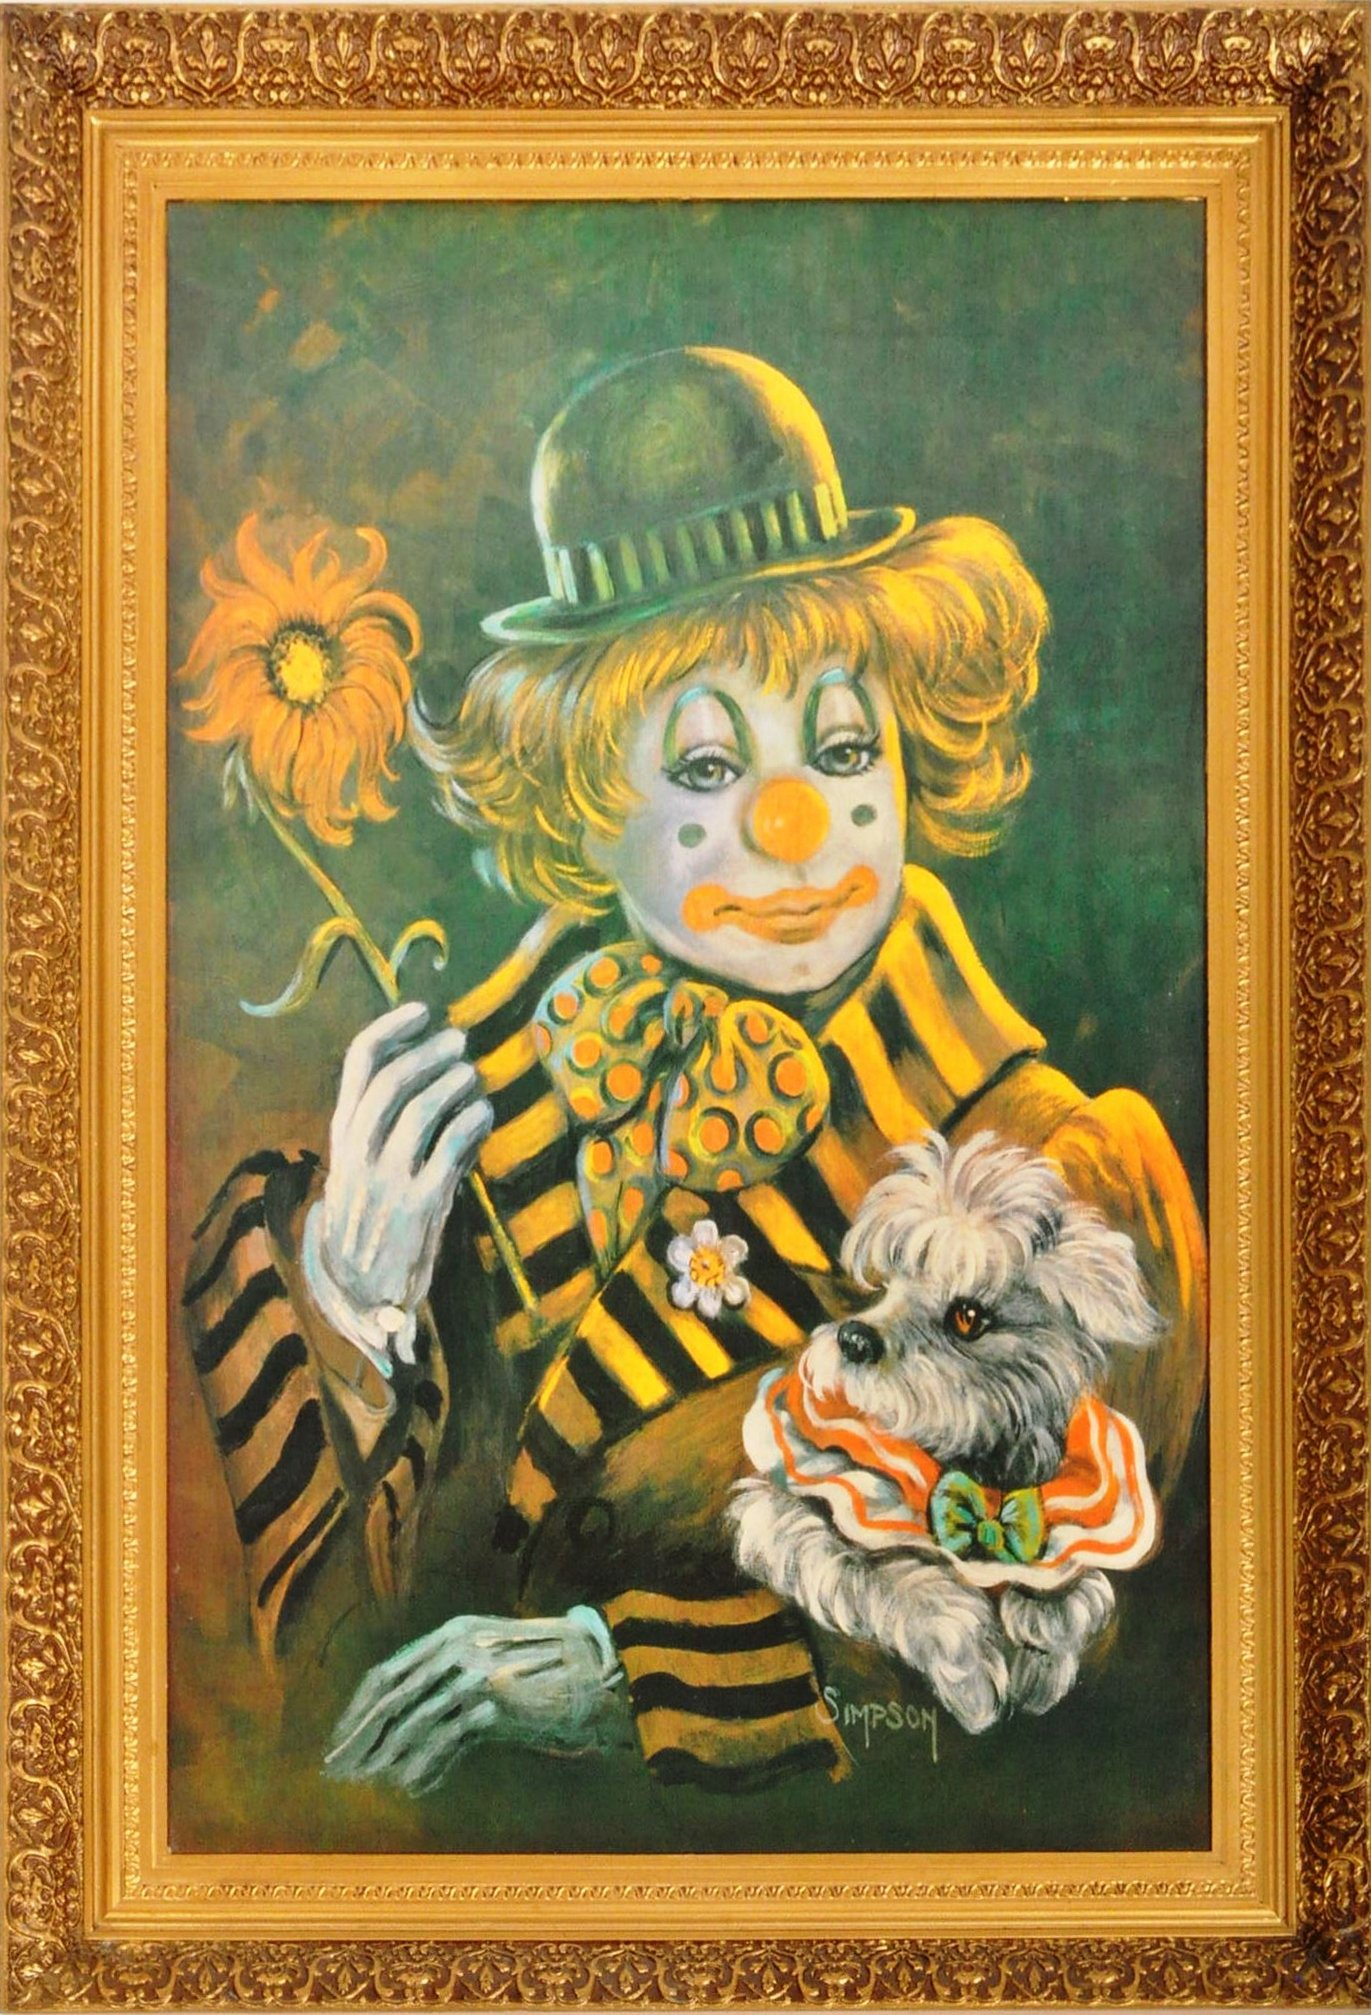 MID CENTURY CLOWN PRINT ON CARD SET WITHIN A BRASS EFFECT FRAME